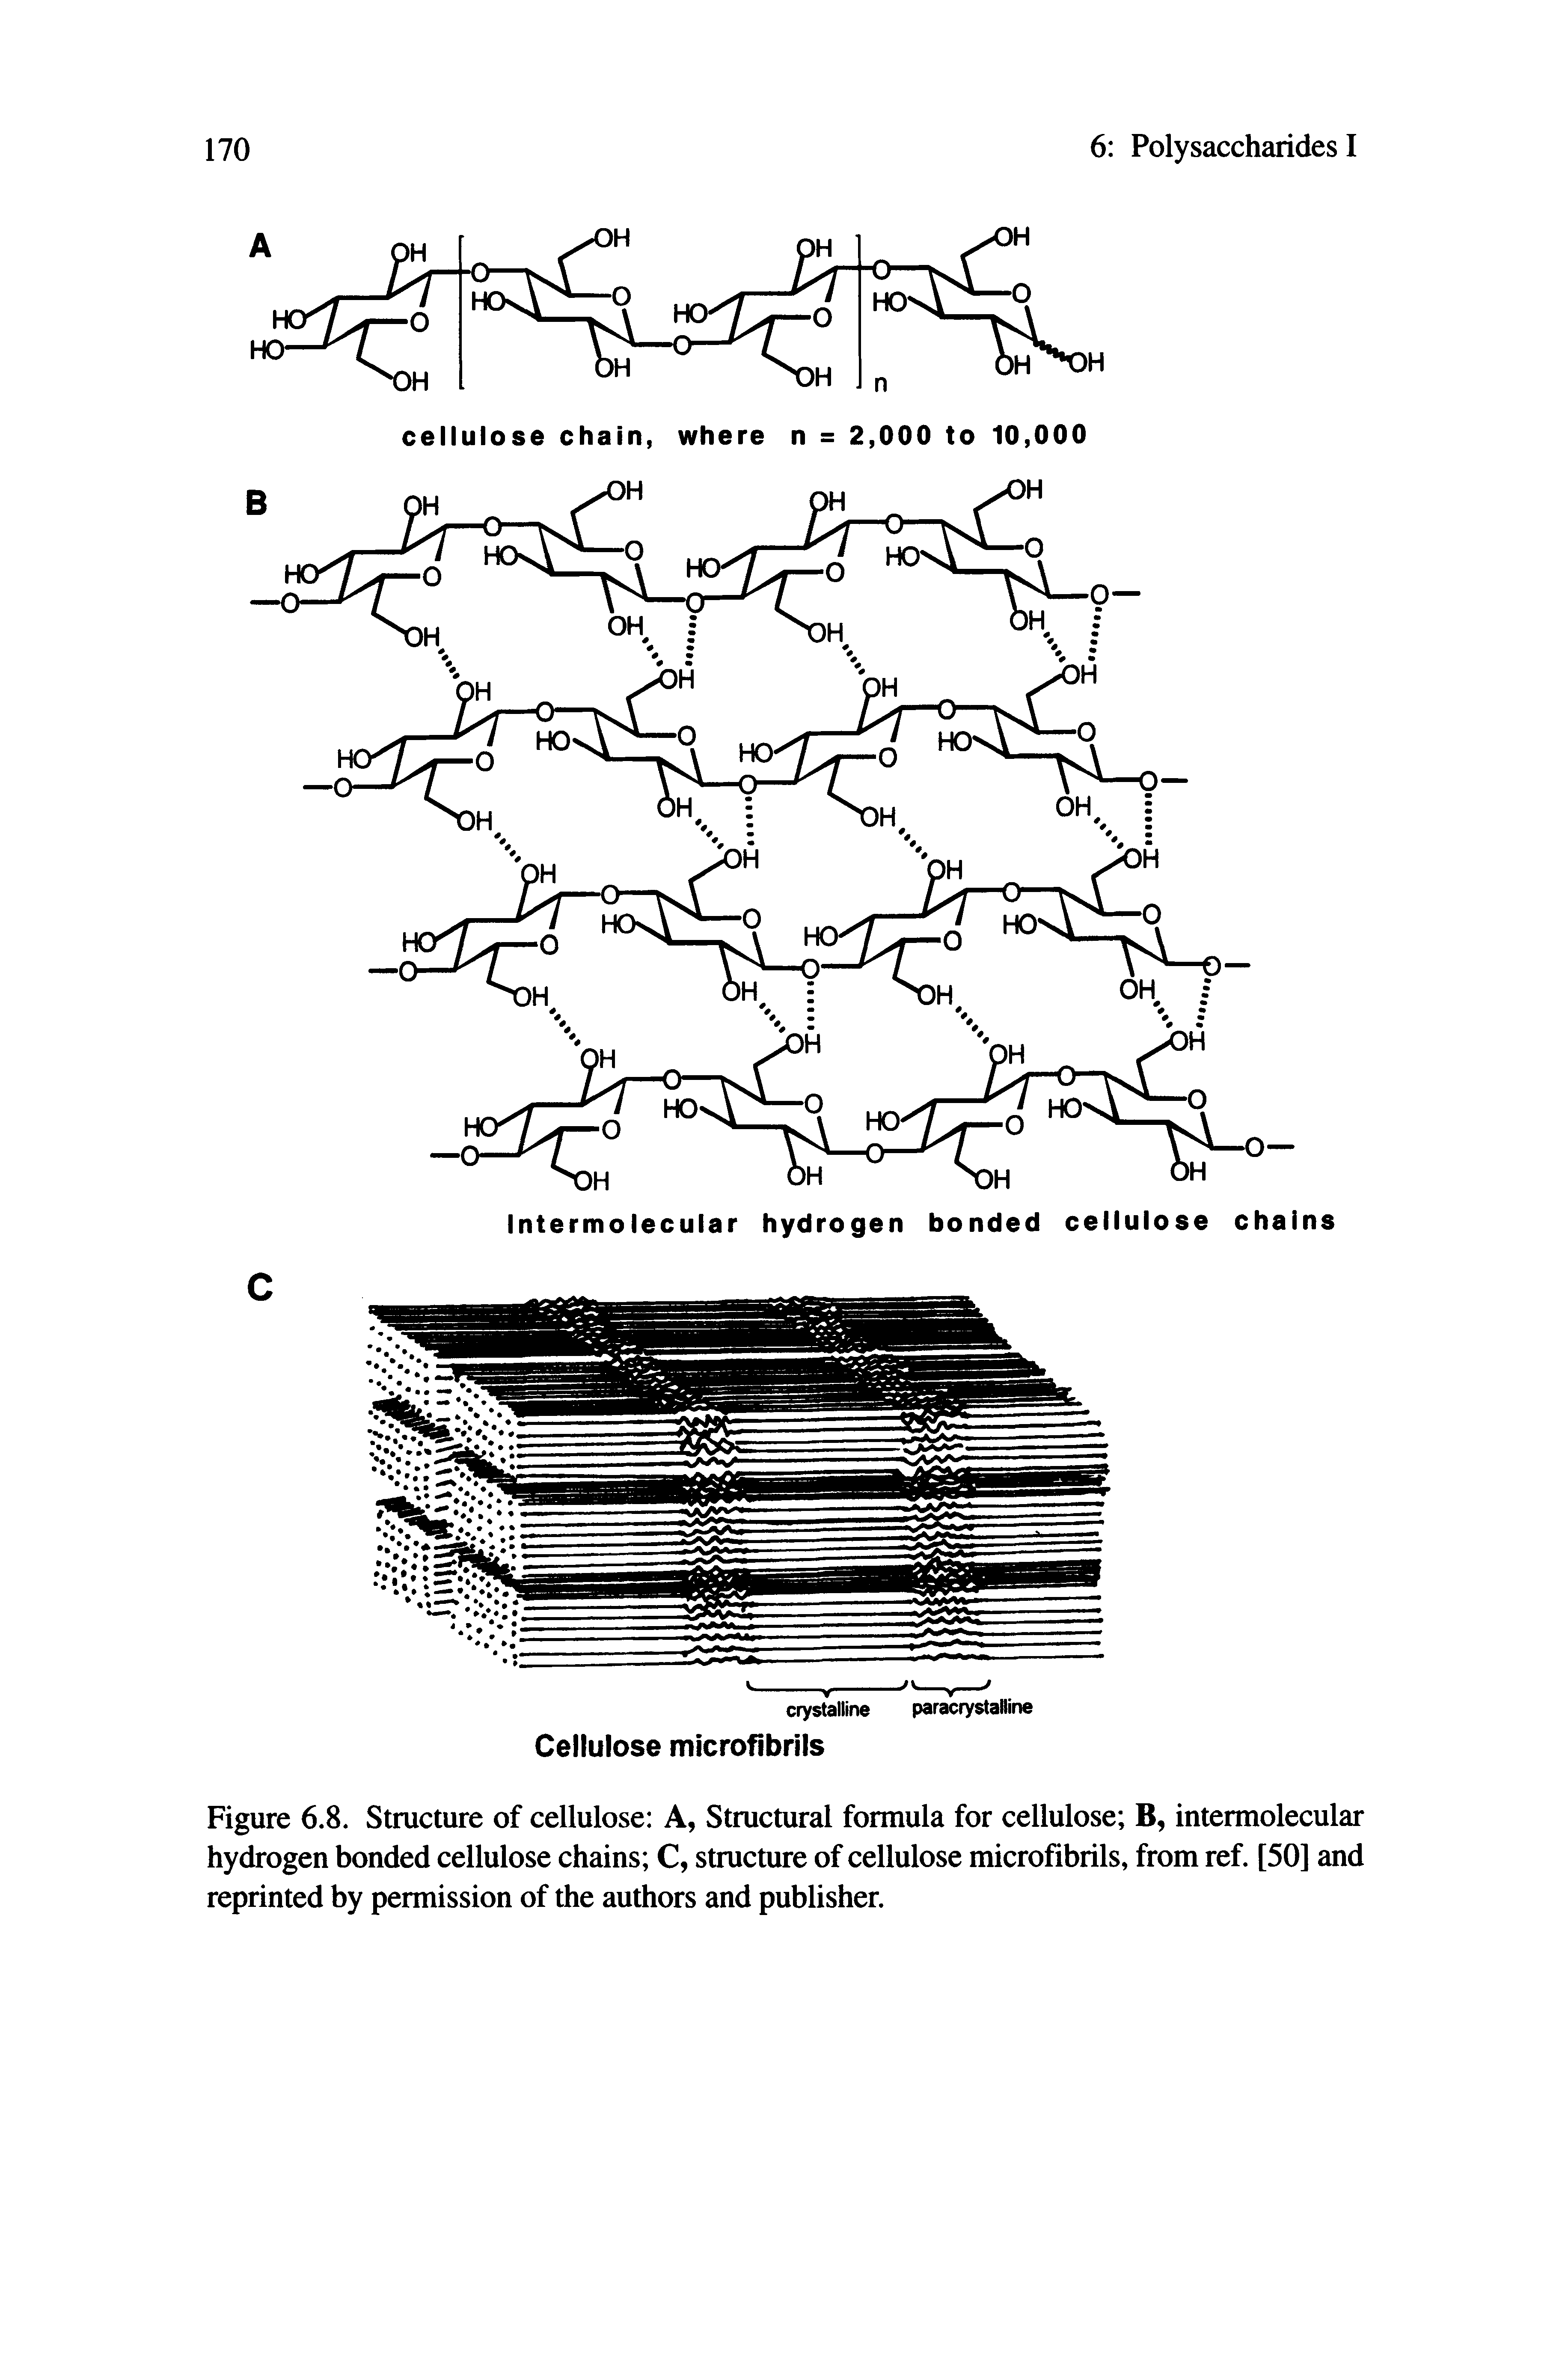 Figure 6.8. Structure of cellulose A, Structural formula for cellulose B, intermolecular hydrogen bonded cellulose chains C, structure of cellulose microfibrils, from ref. [50] and reprinted by permission of the authors and publisher.